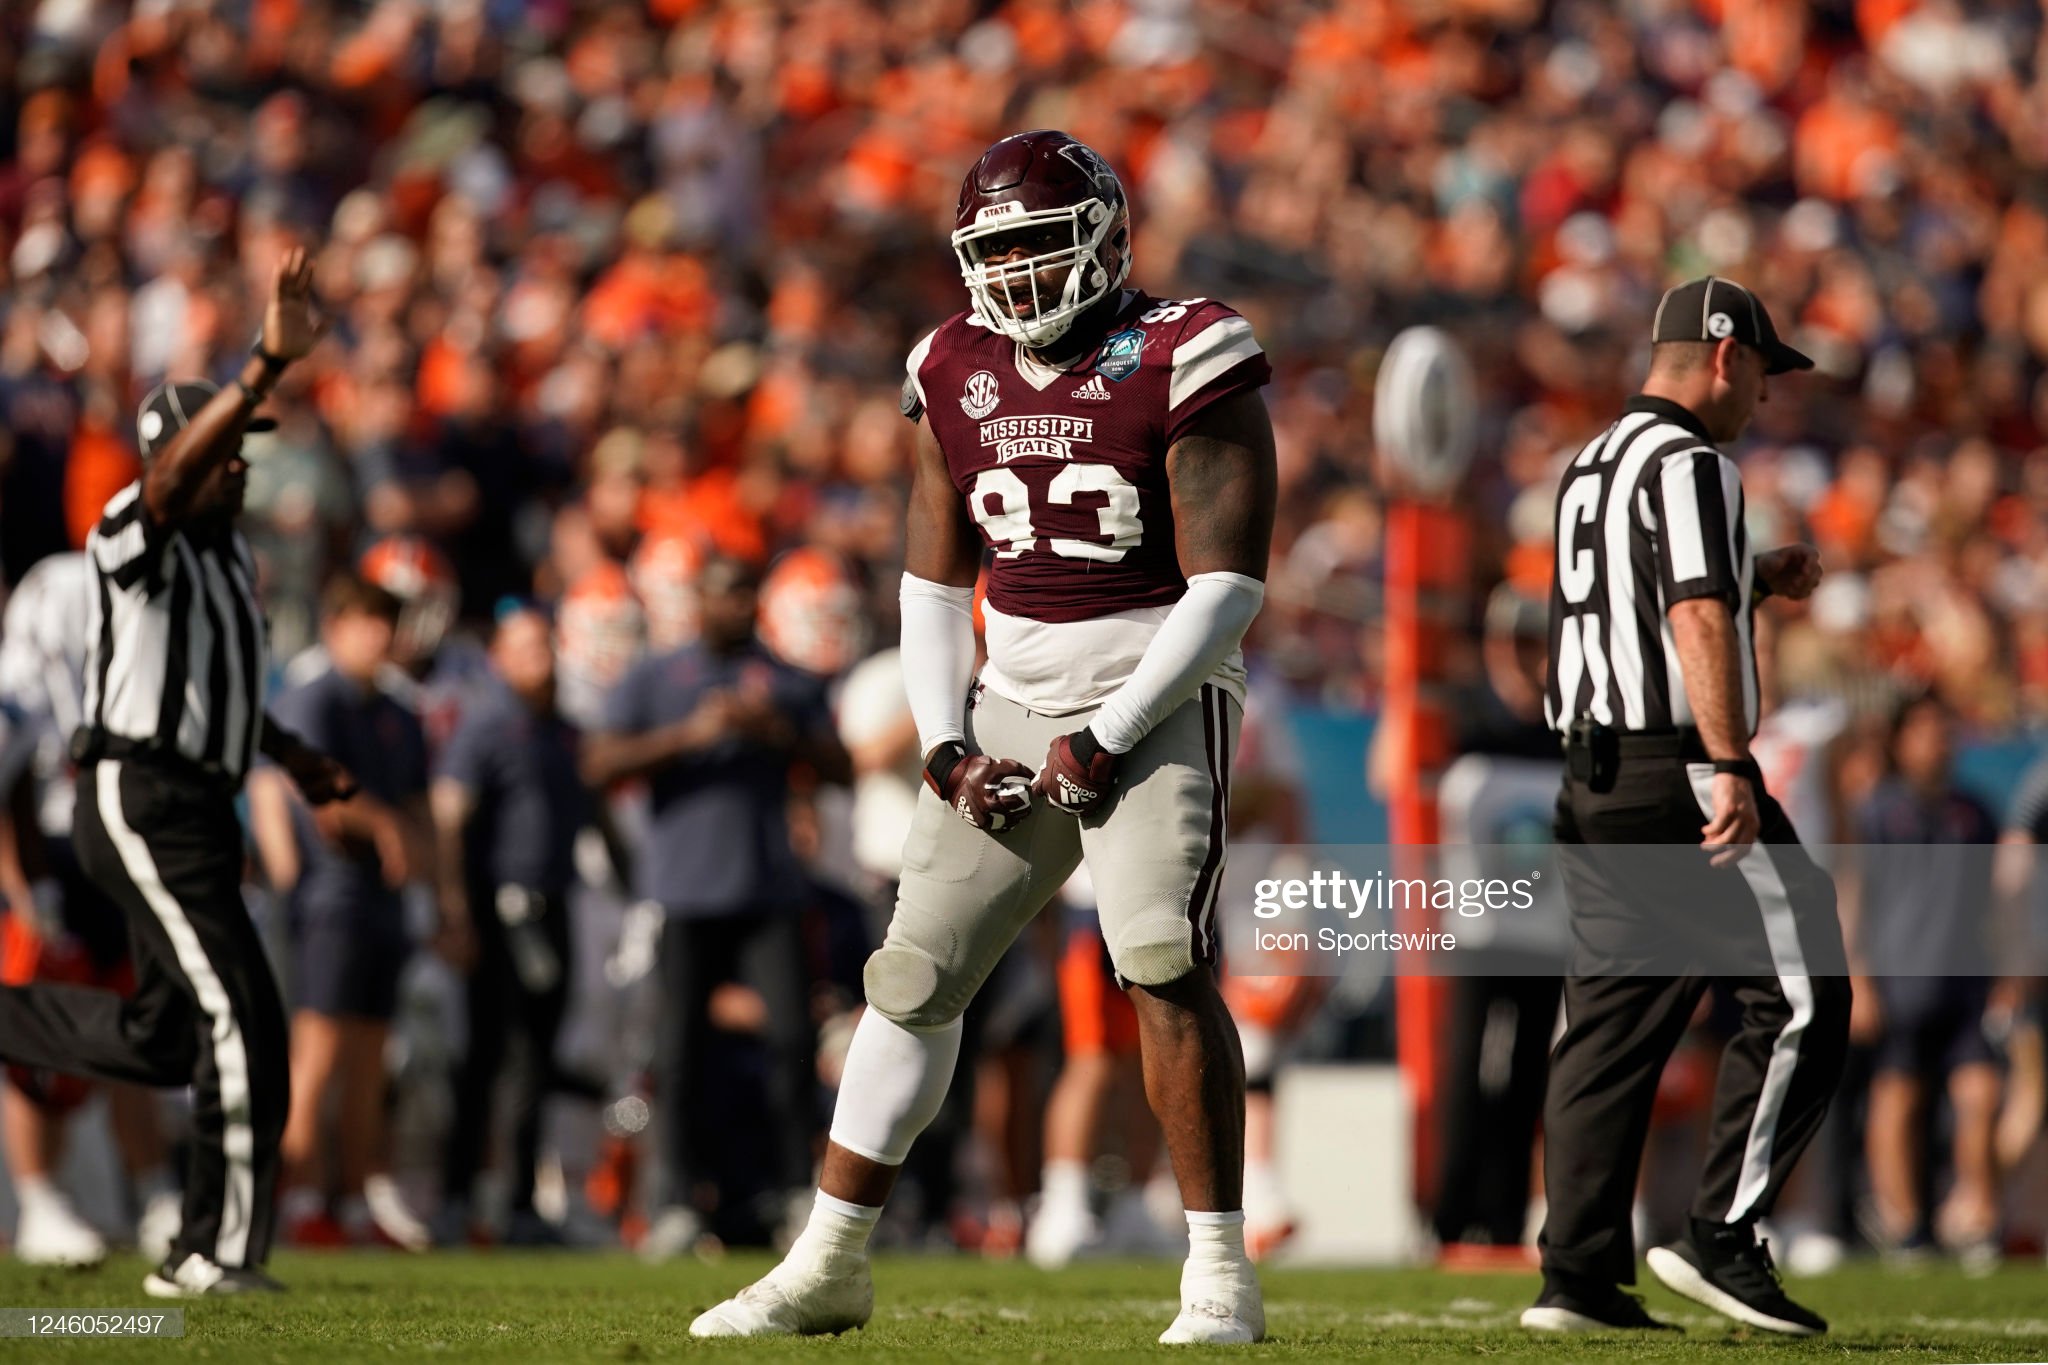 2023 NFL Draft Scouting Notes: DT Cameron Young, Mississippi State